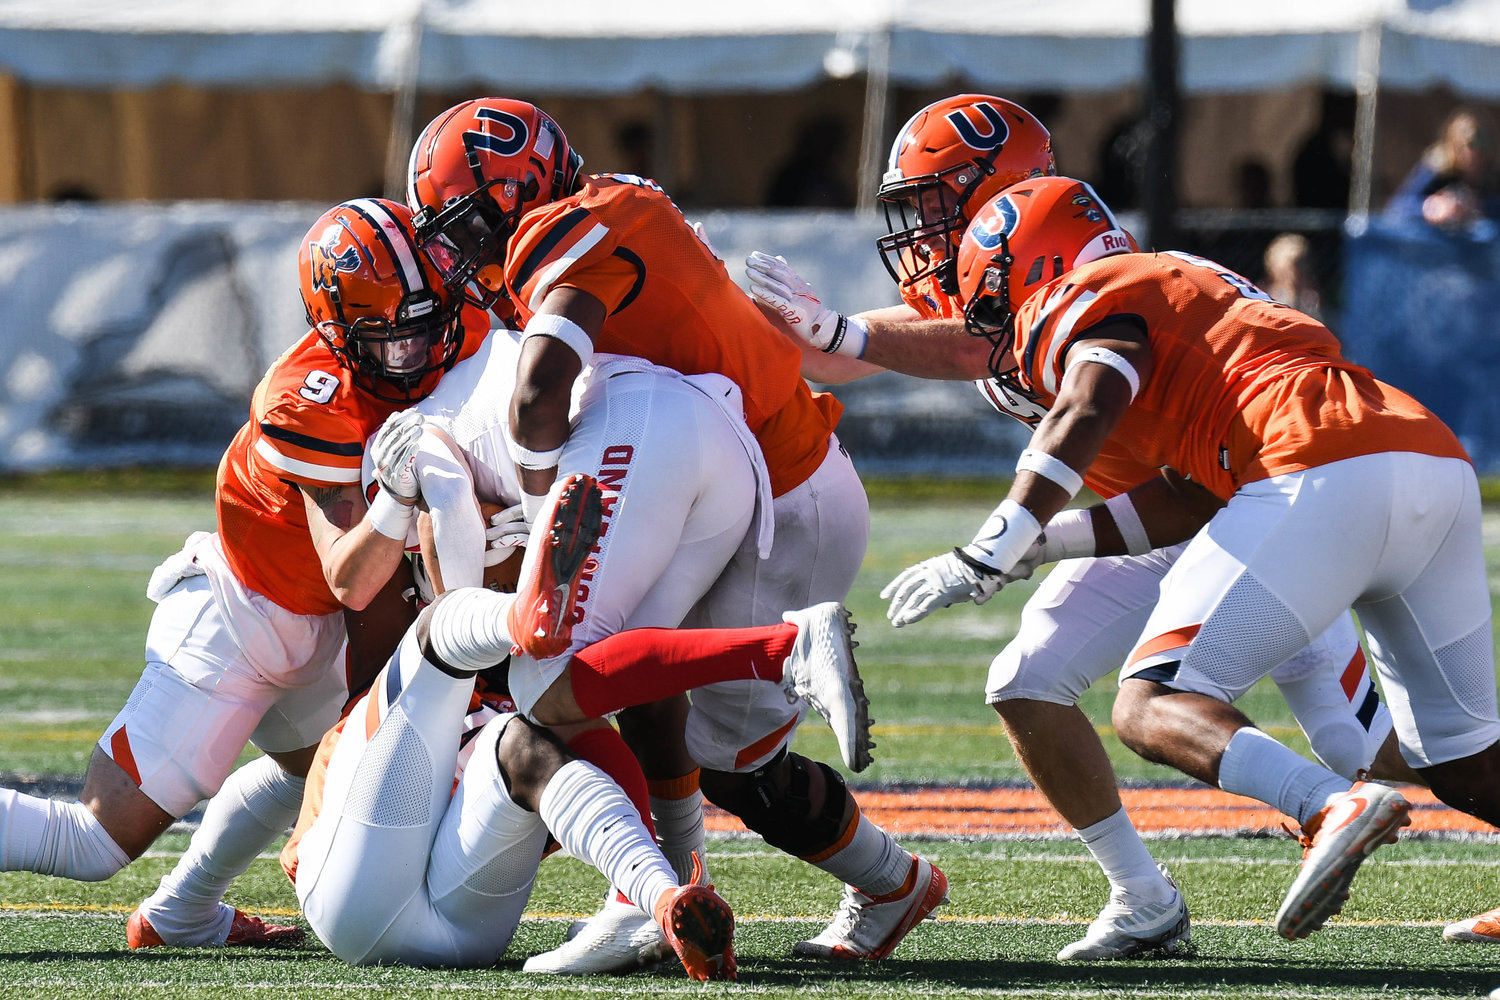 A group of Pioneers defenders make a tackle during the Empire 8 game against SUNY Cortland on Saturday afternoon at Charles A. Gaetano Stadium in Utica.